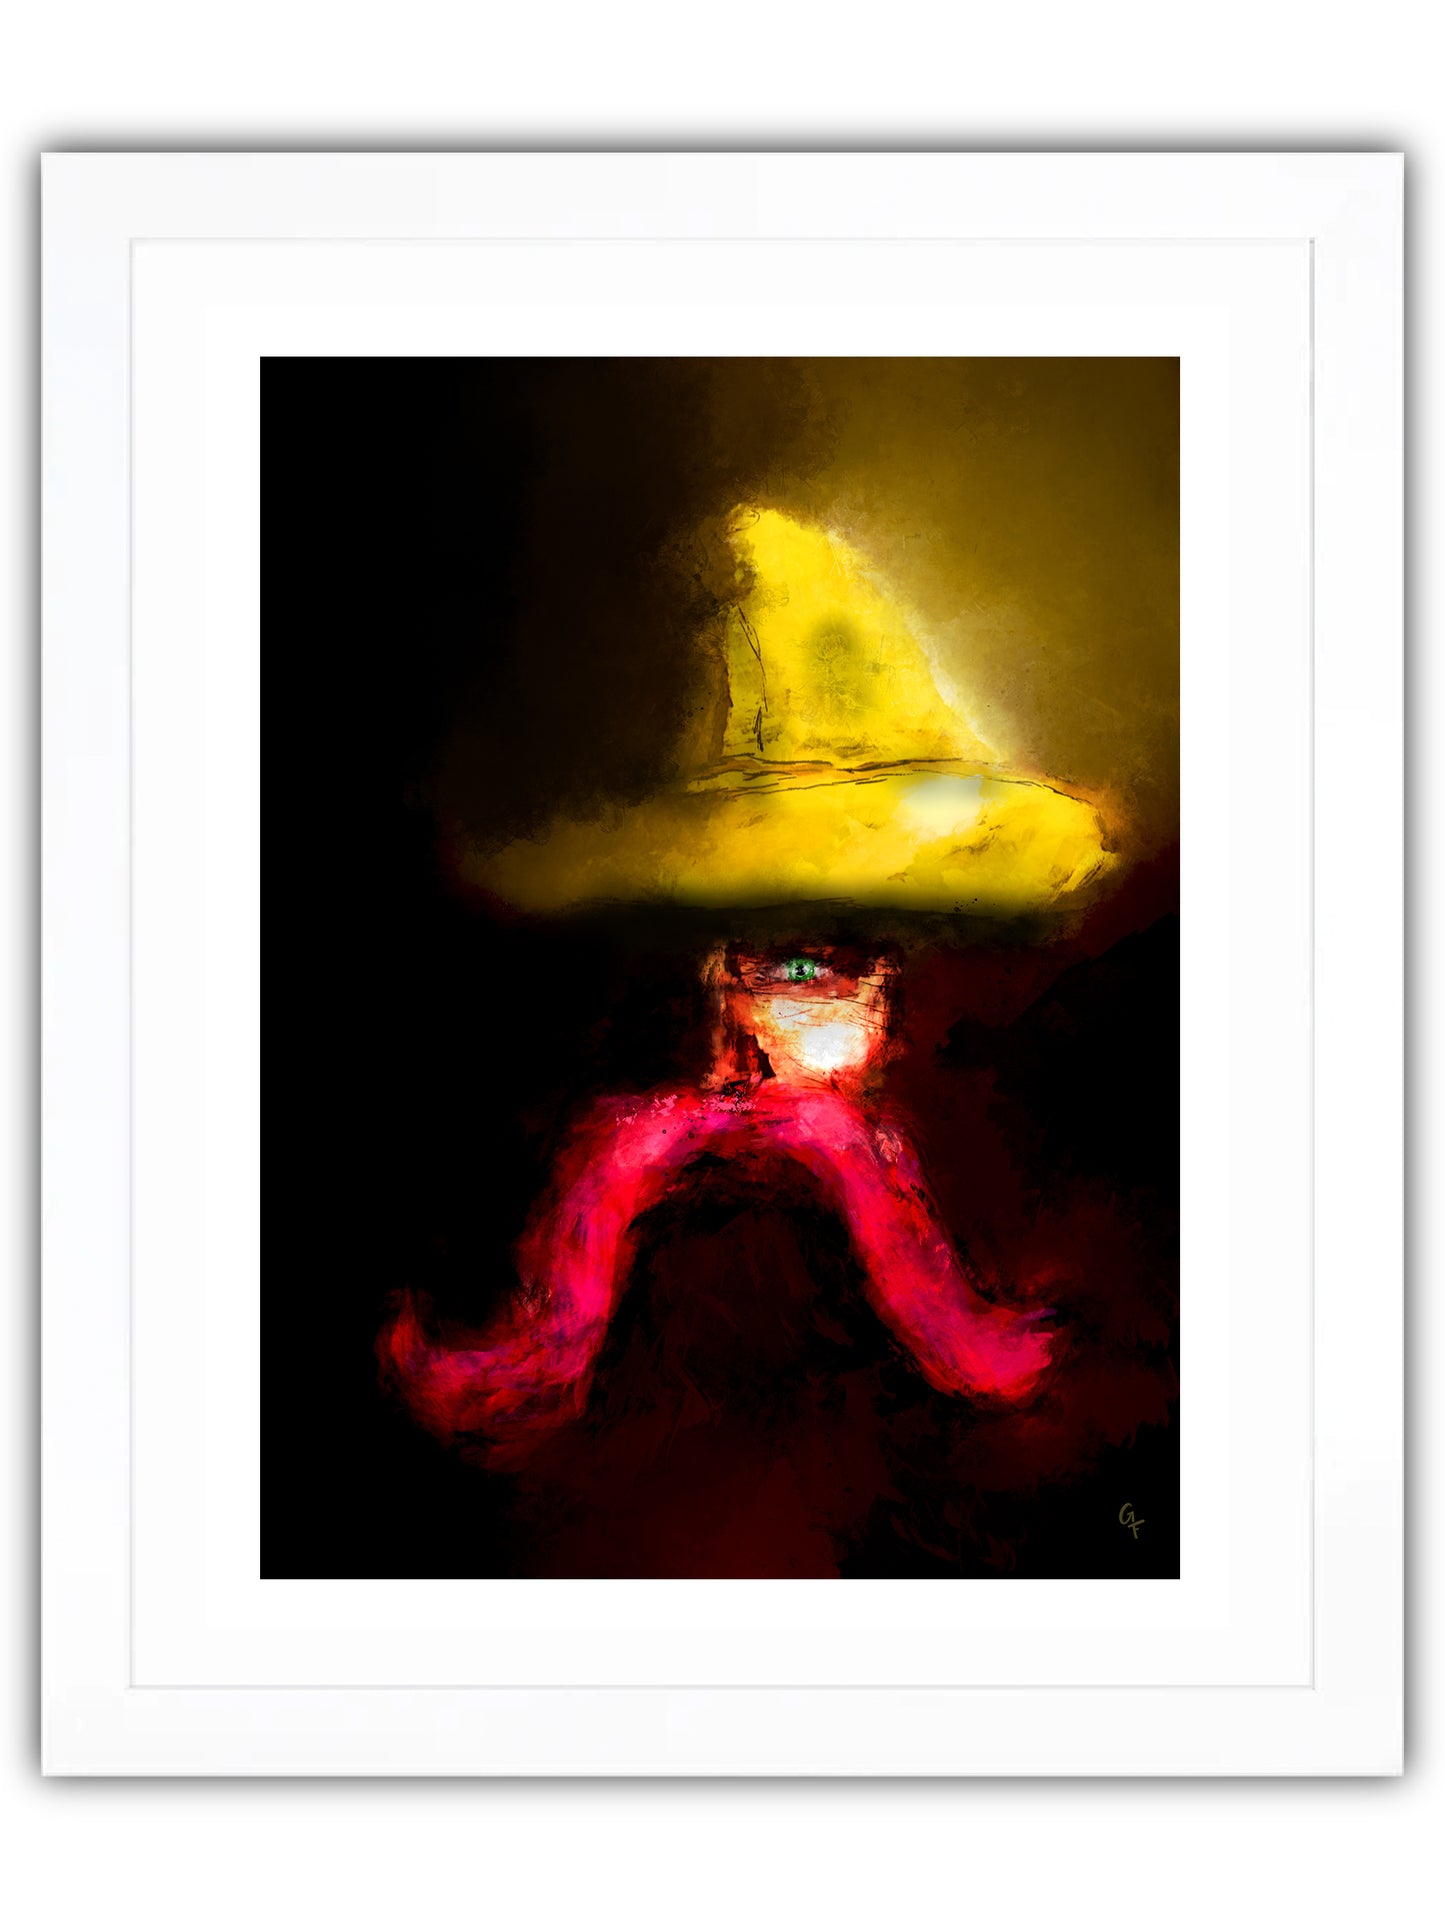 Man wearing yellow hat with red moustache in shadows